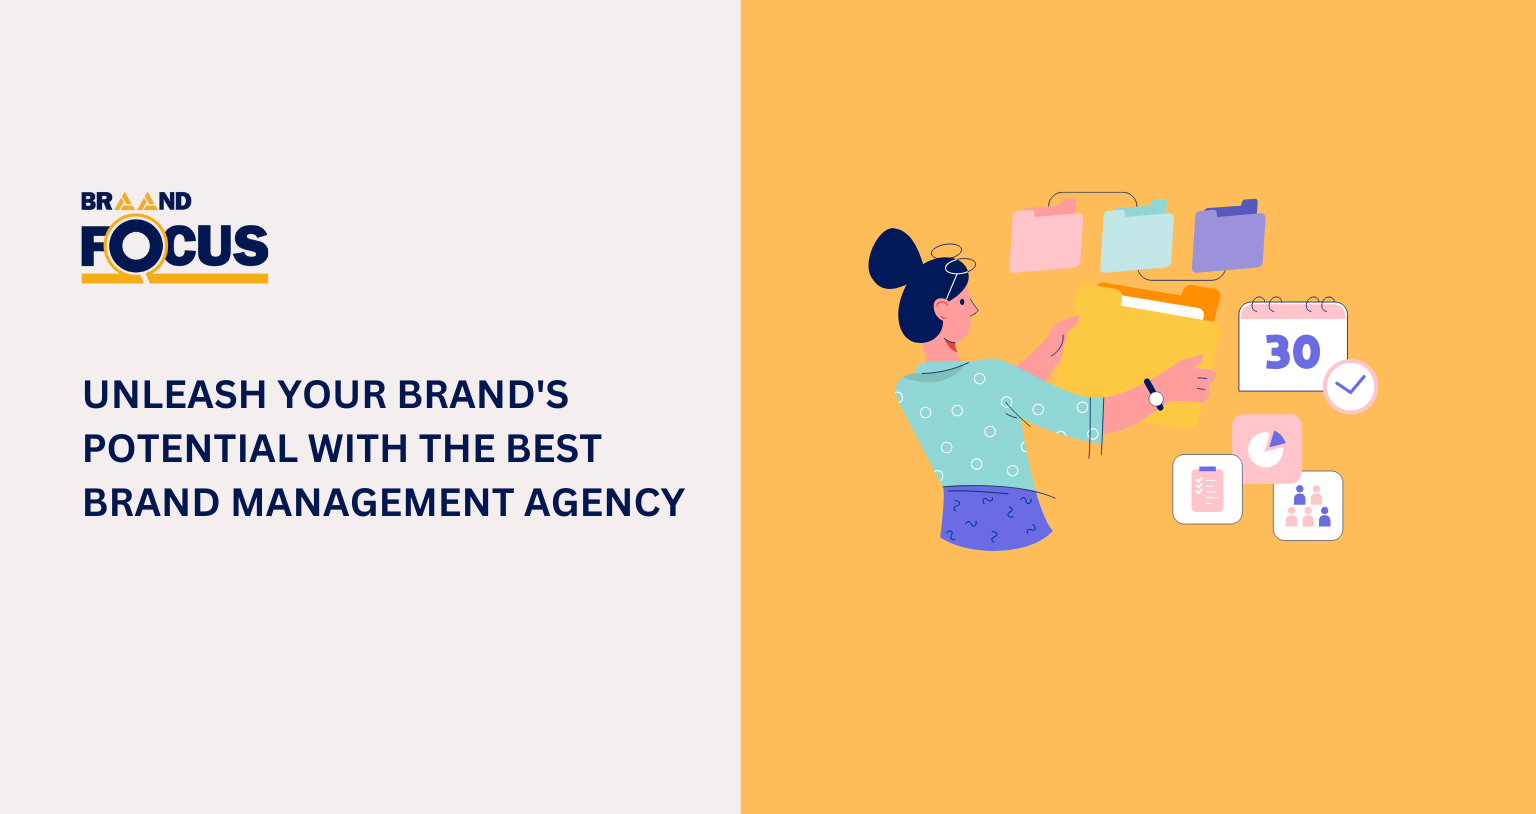 Maximize your brand's potential with top brand management agency services.